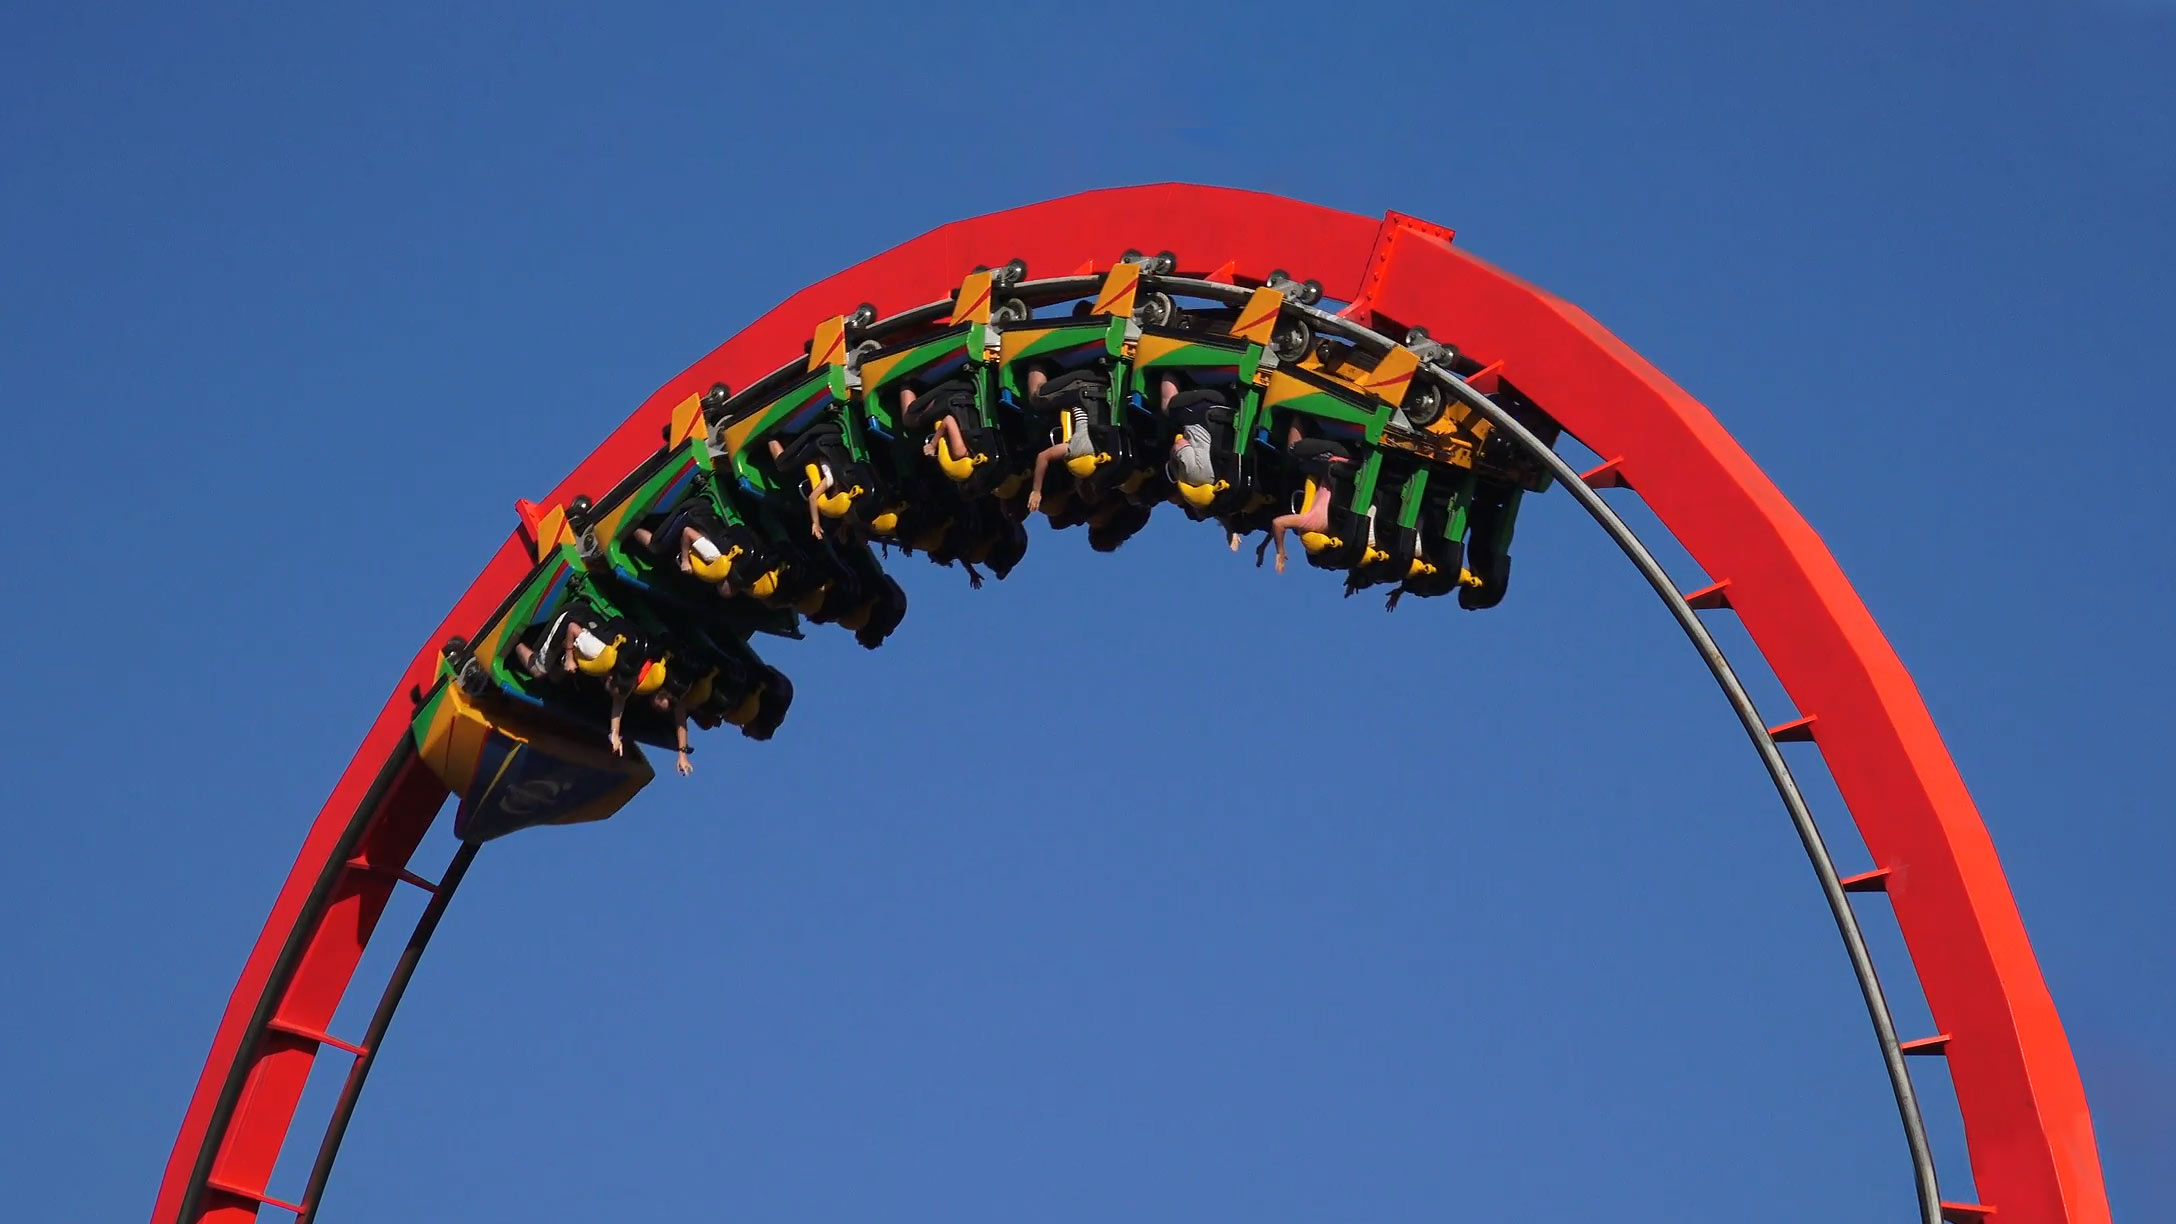 image of red roller coaster